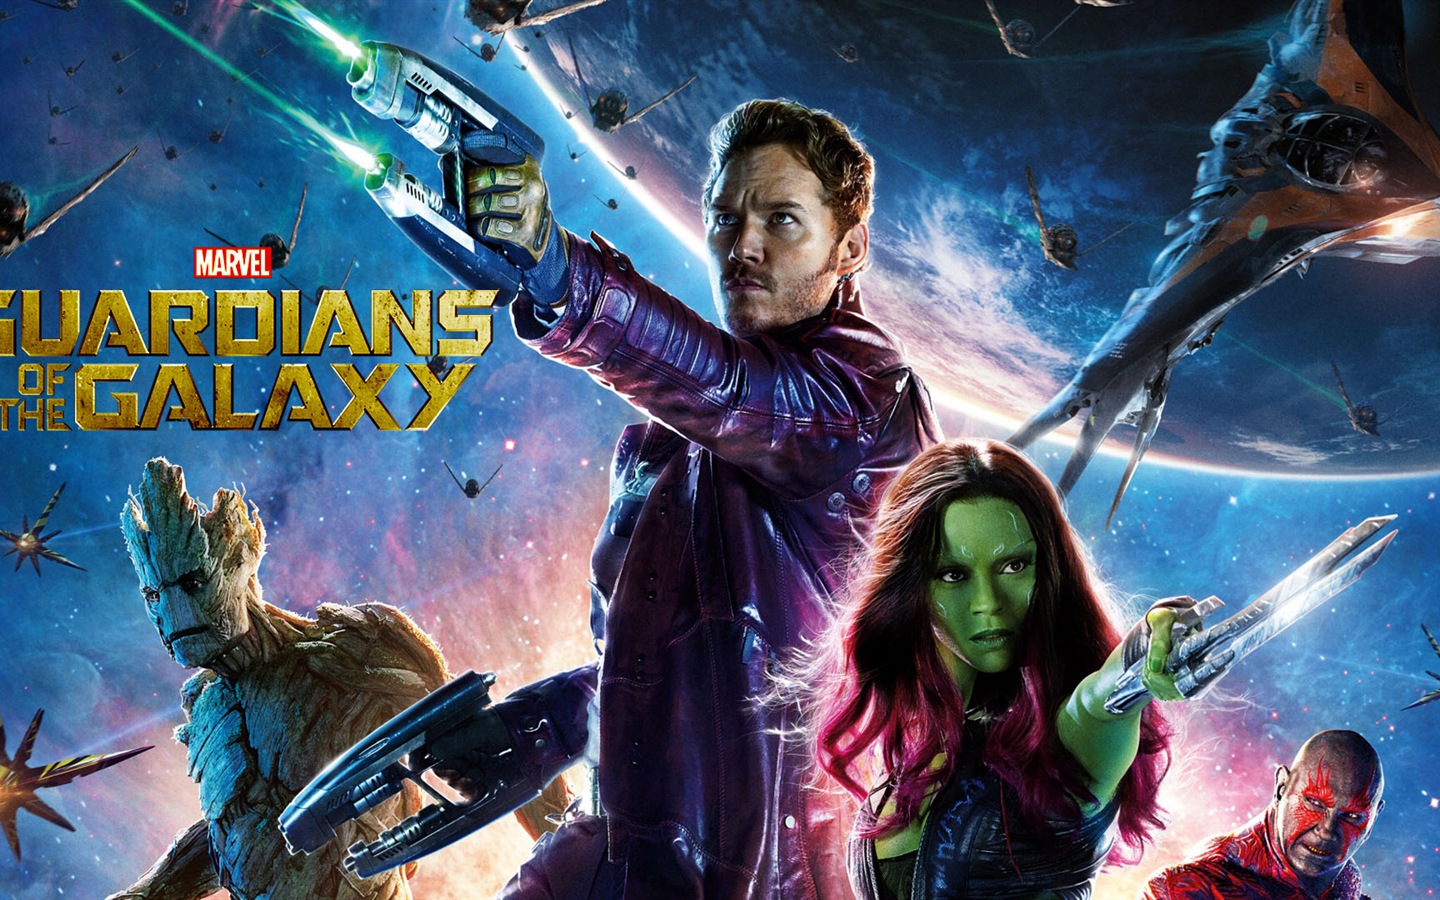 Guardians of the Galaxy 2014 HD movie wallpapers #15 - 1440x900